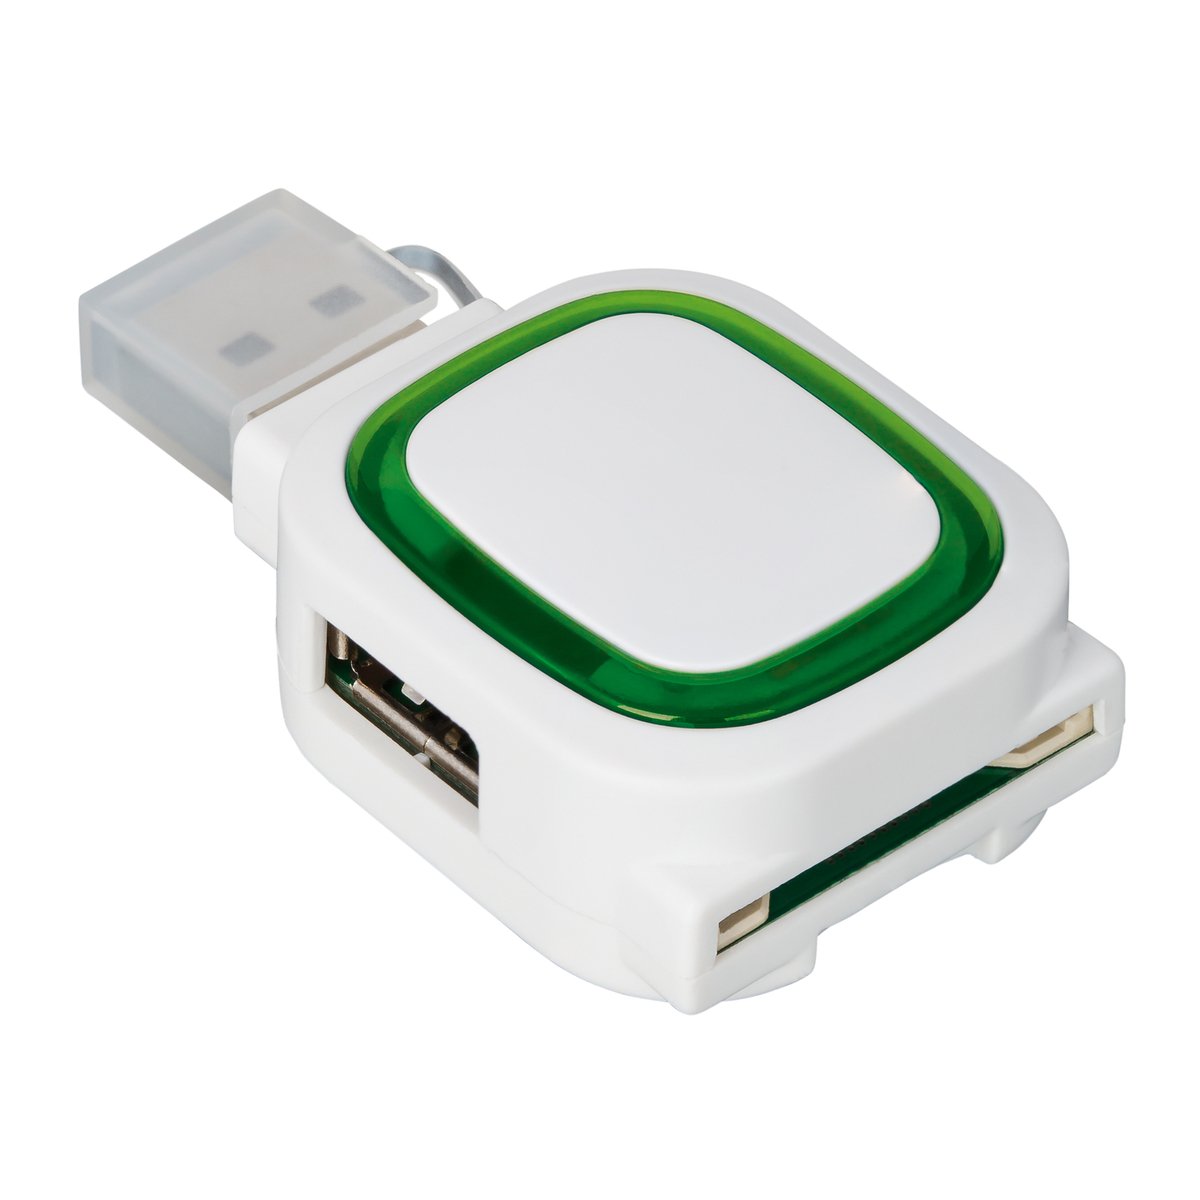 2-port USB hub and card reader COLLECTION 500 green